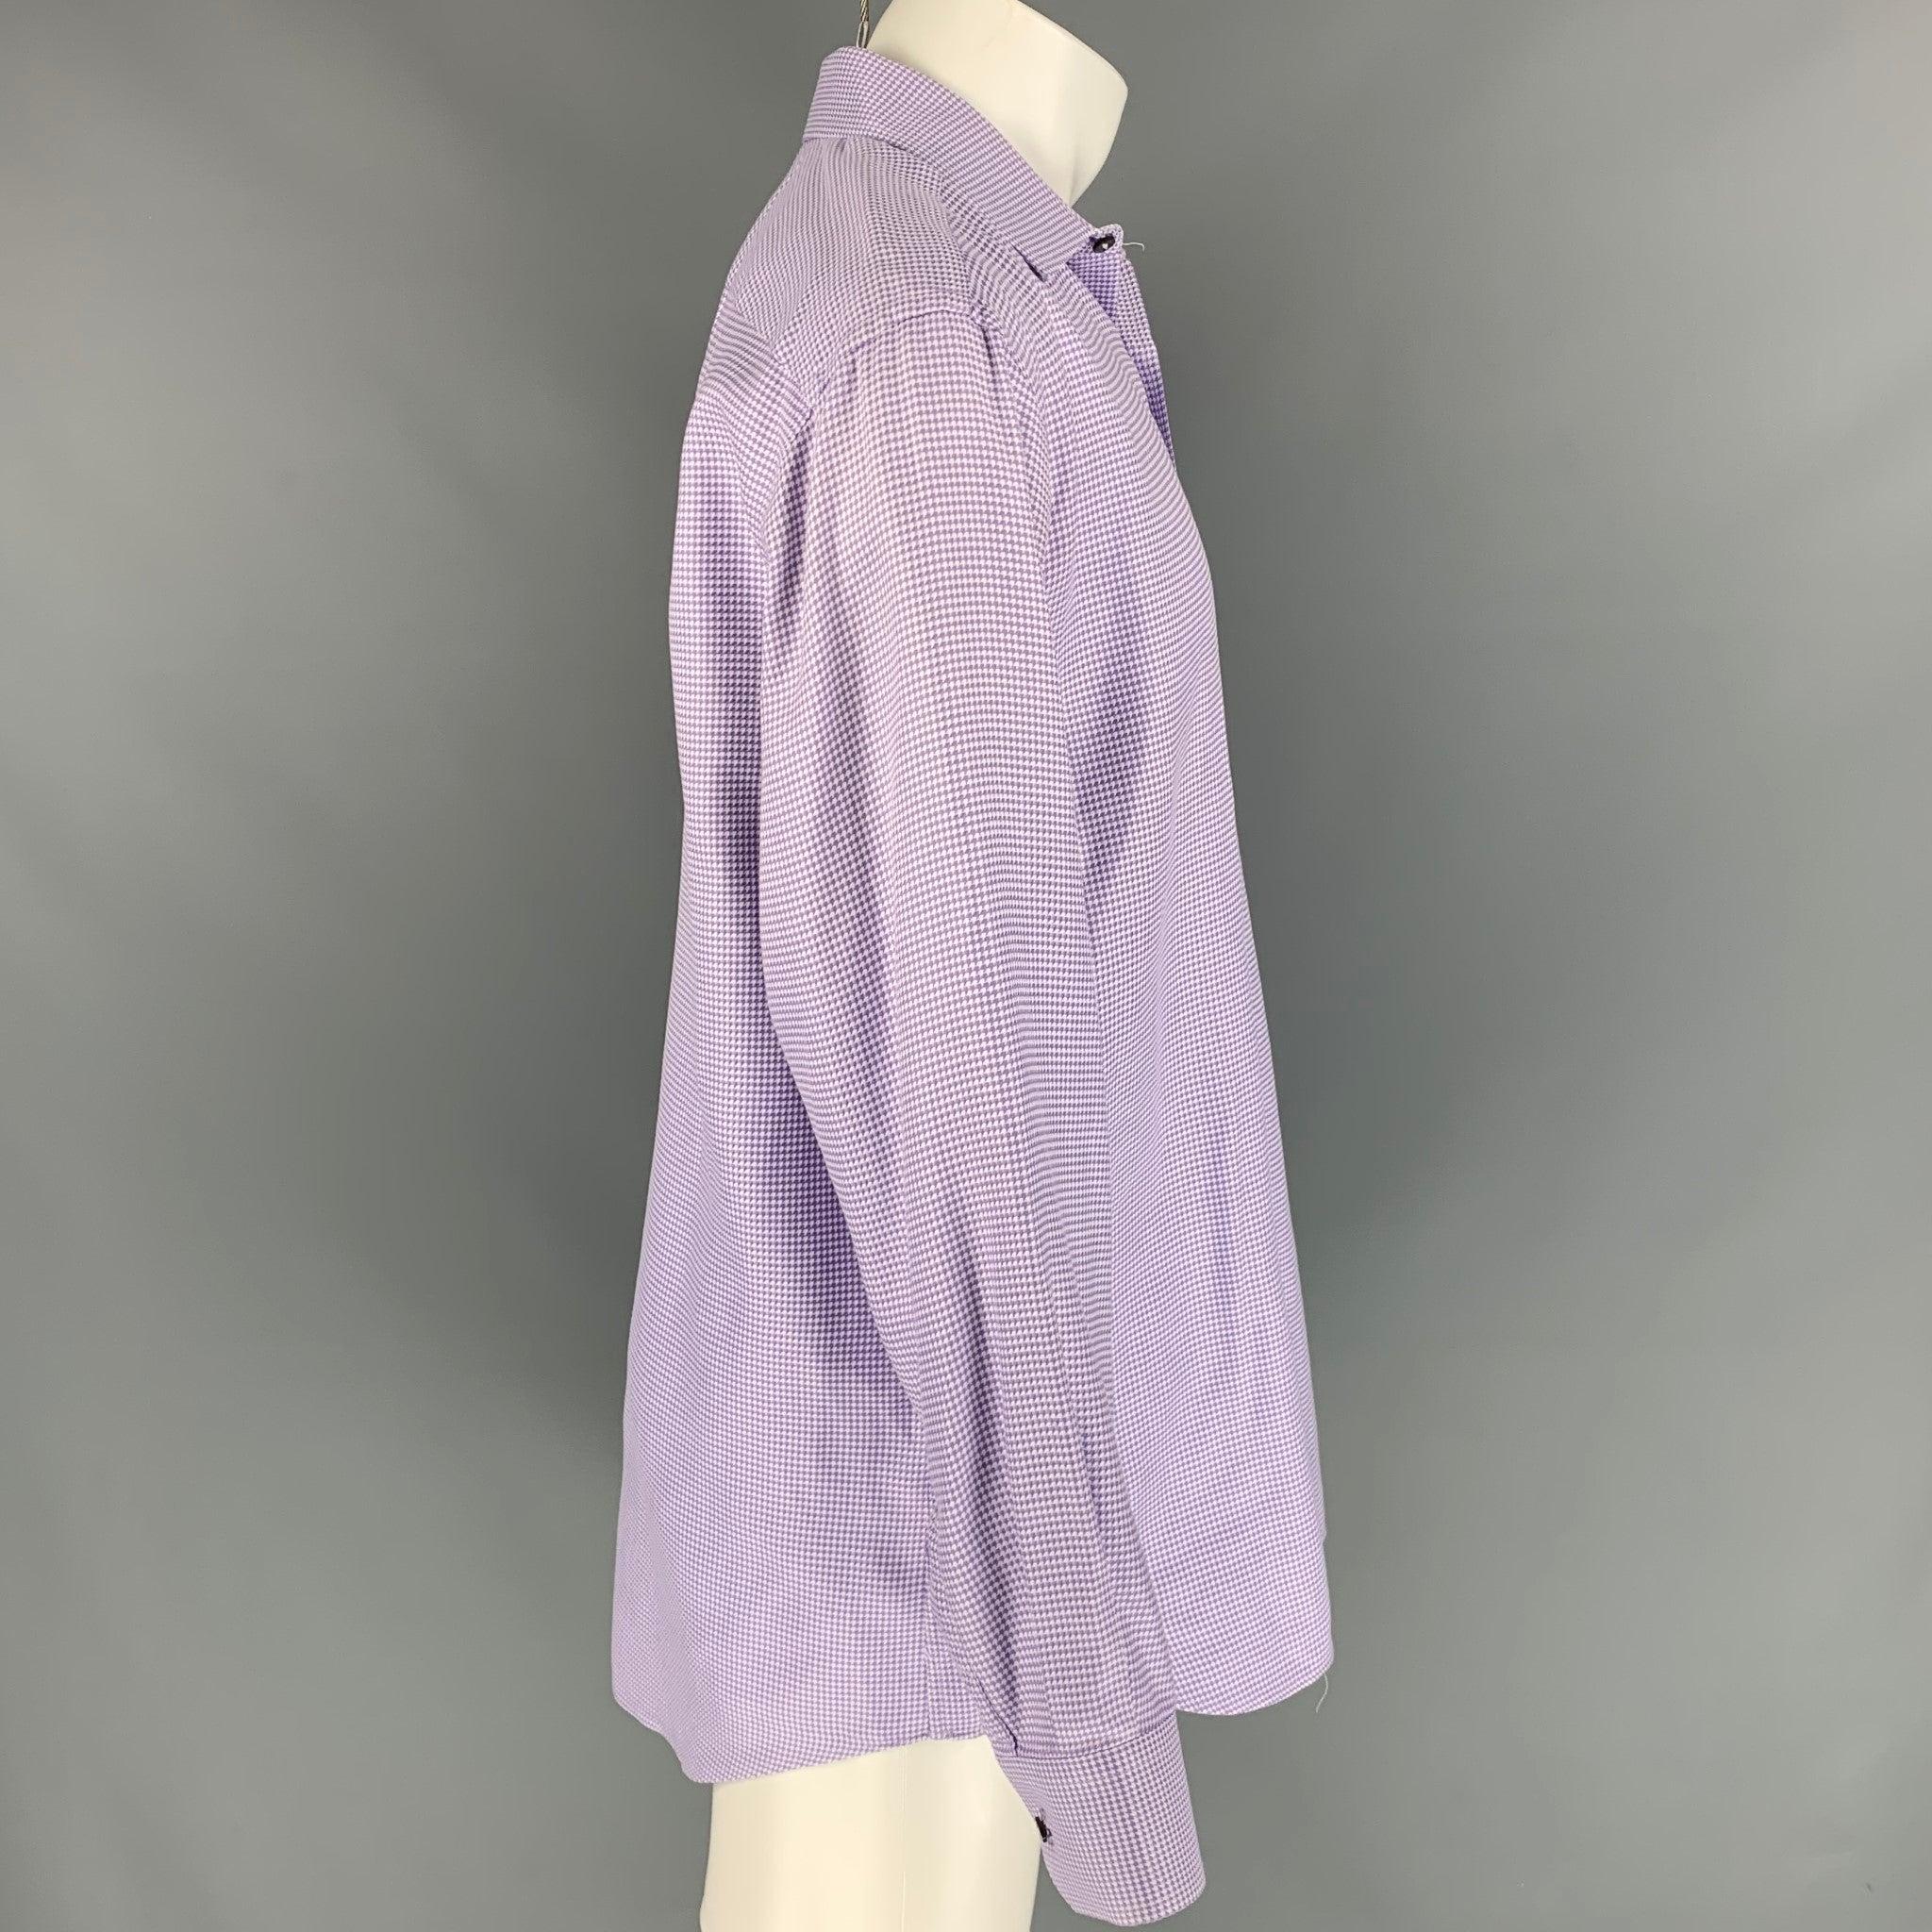 PAUL SMITH long sleeve shirt comes in a lavender & white checkered cotton featuring a classic fit, spread collar, and a buttoned closure. Made in Italy.
Very Good
Pre-Owned Condition. 

Marked:   16.5/39 

Measurements: 
 
Shoulder: 19 inches 